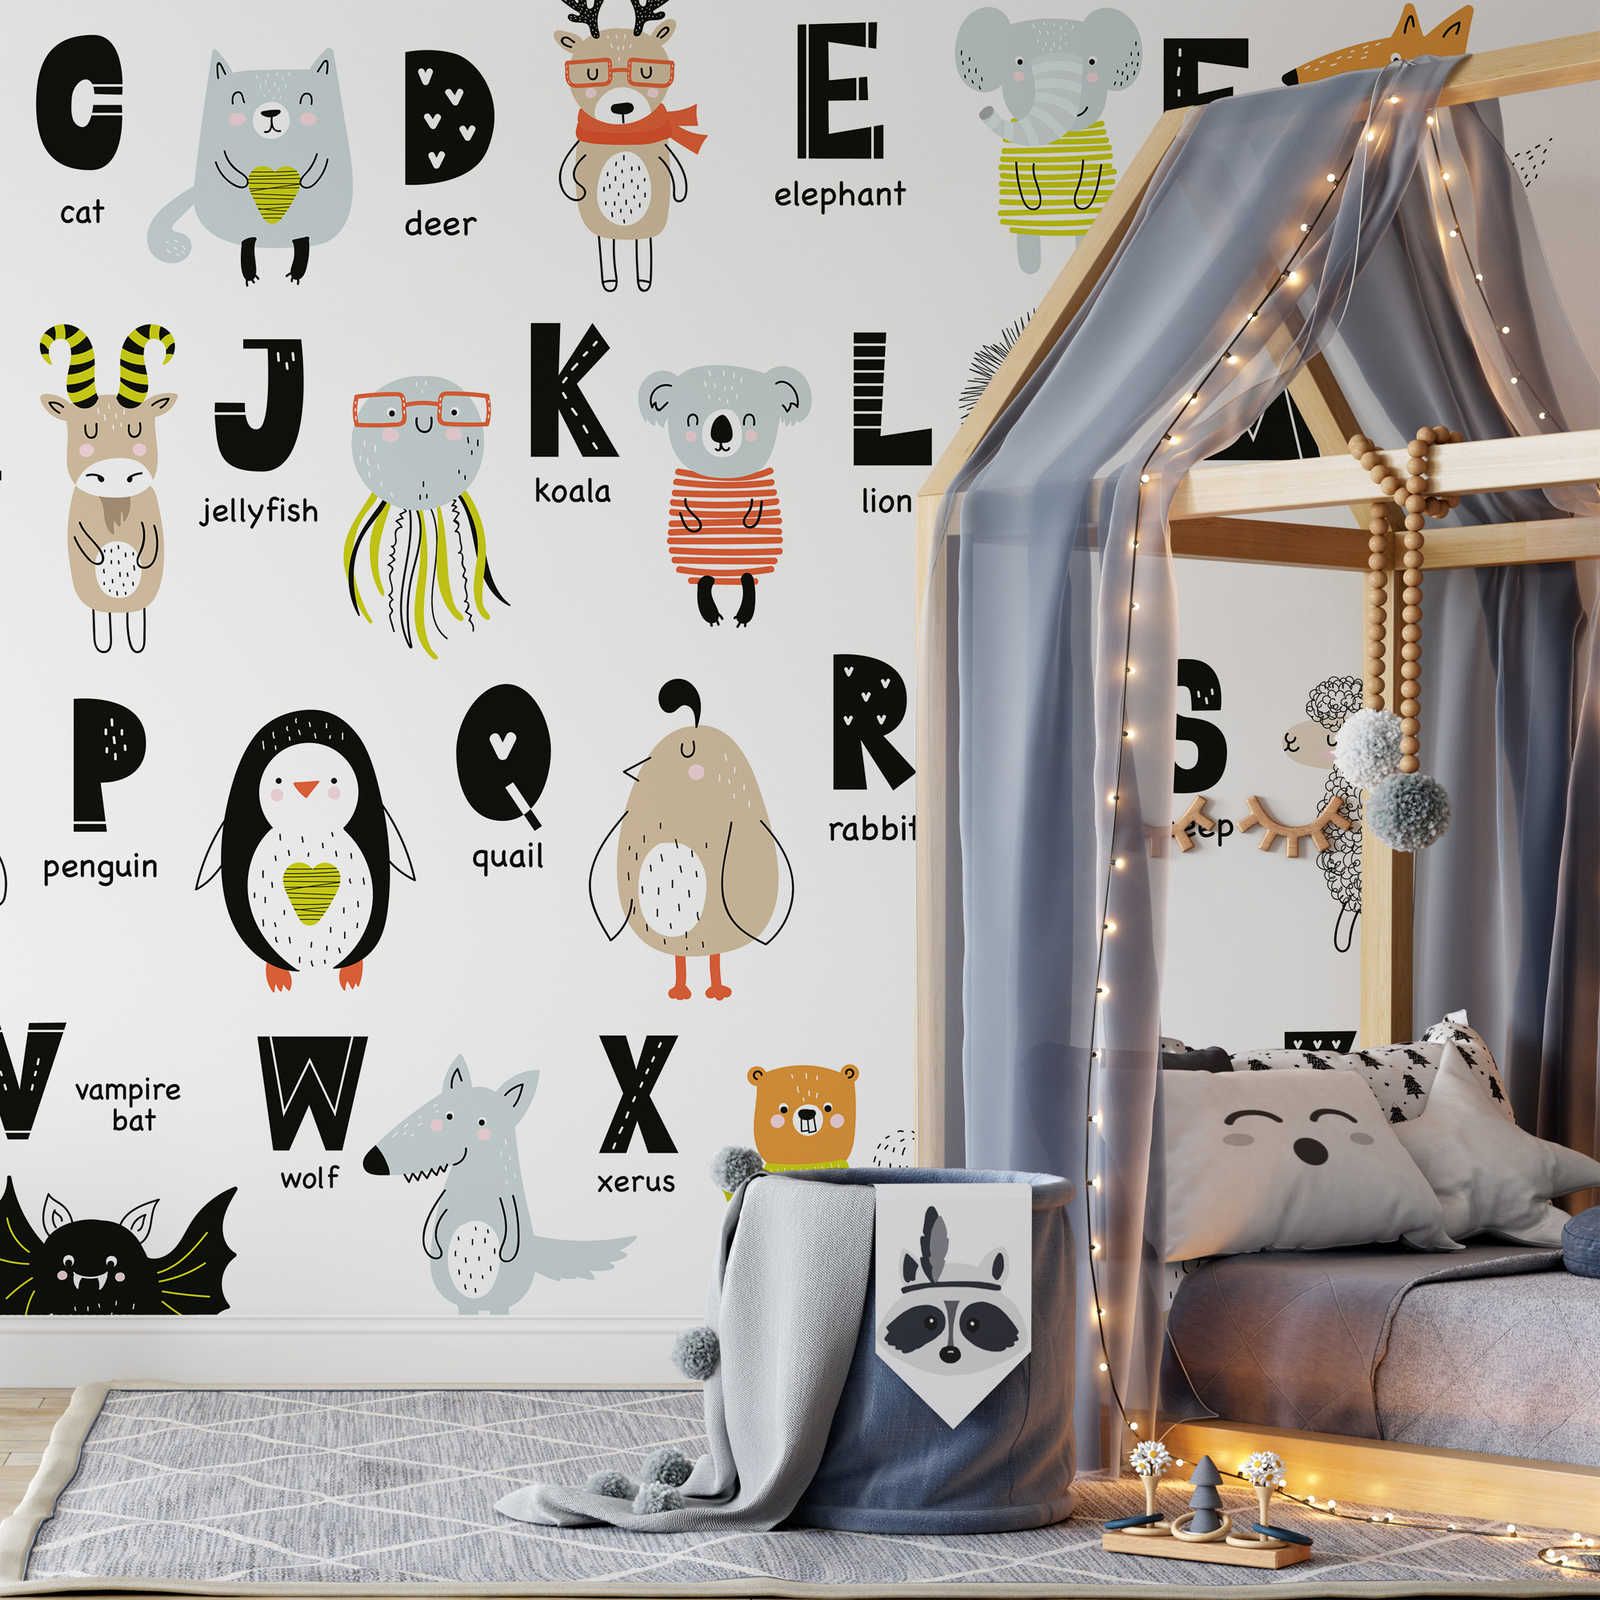         Photo wallpaper Alphabet with animals and animal names - Smooth & slightly shiny non-woven
    